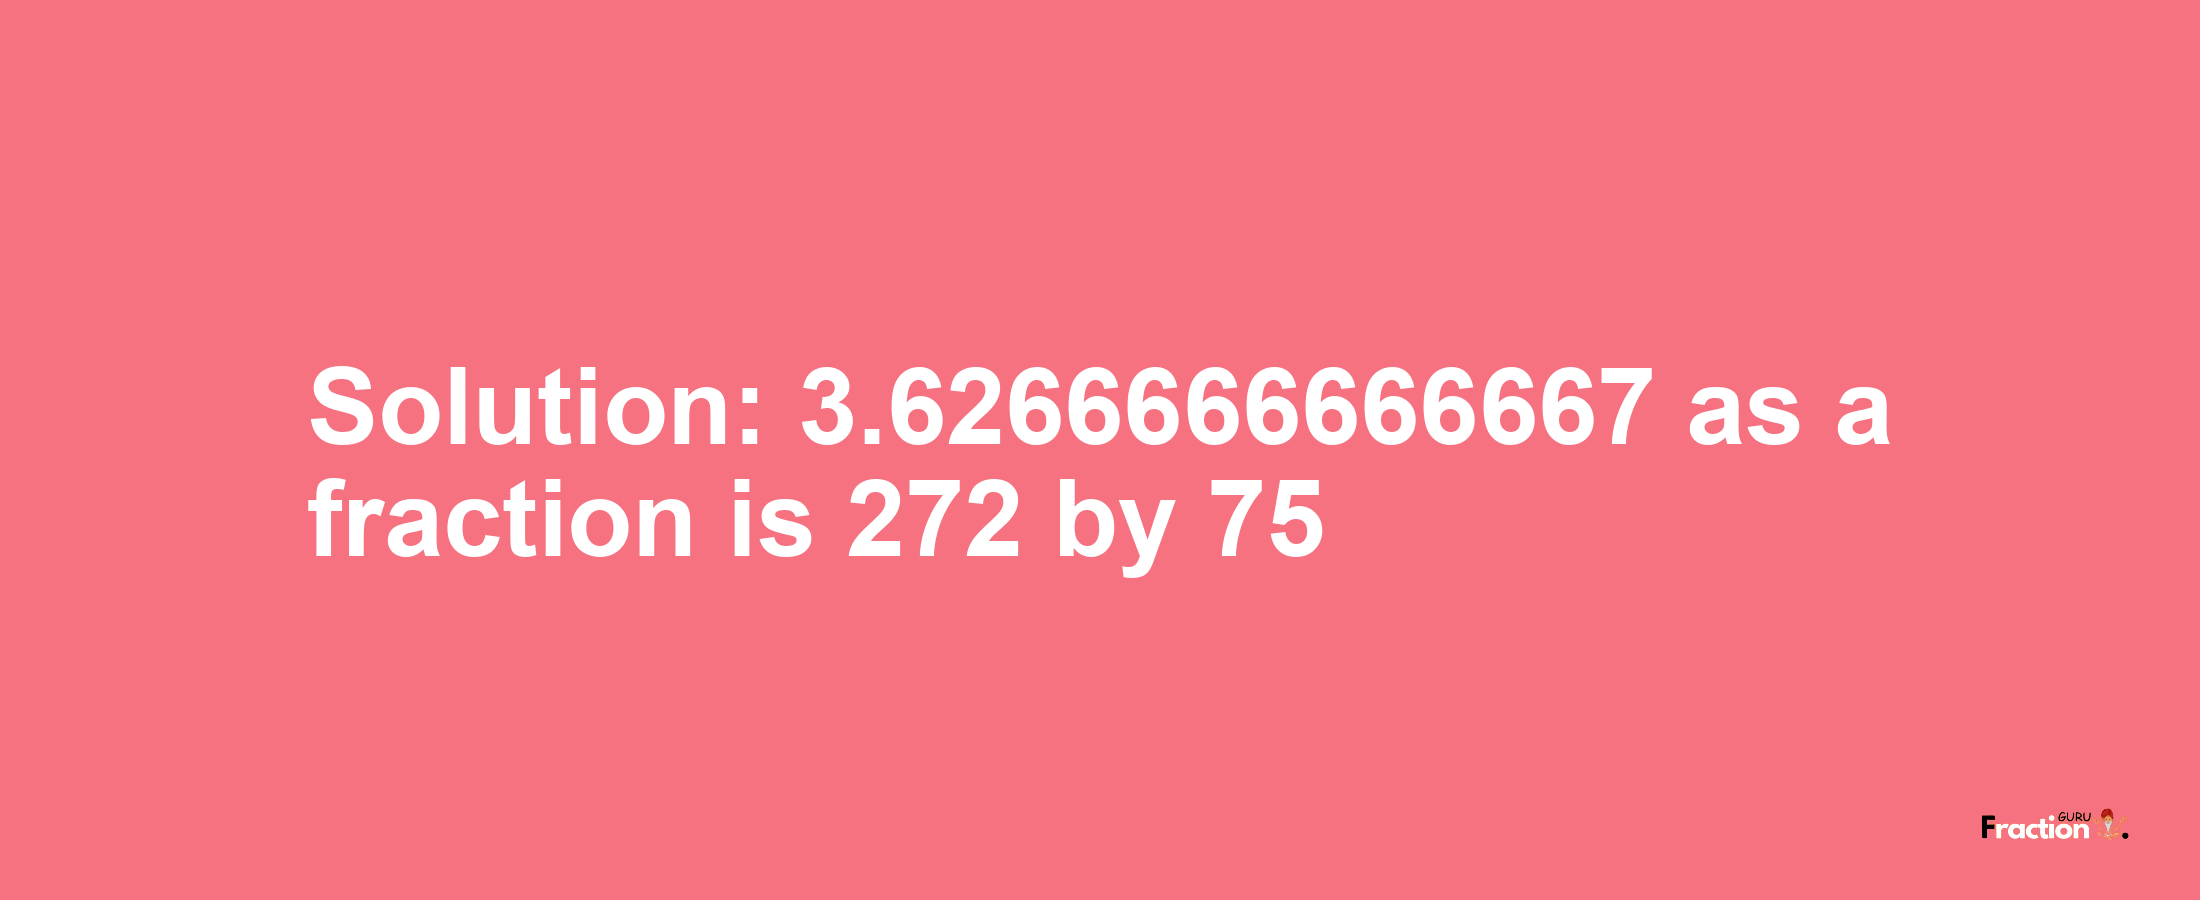 Solution:3.6266666666667 as a fraction is 272/75